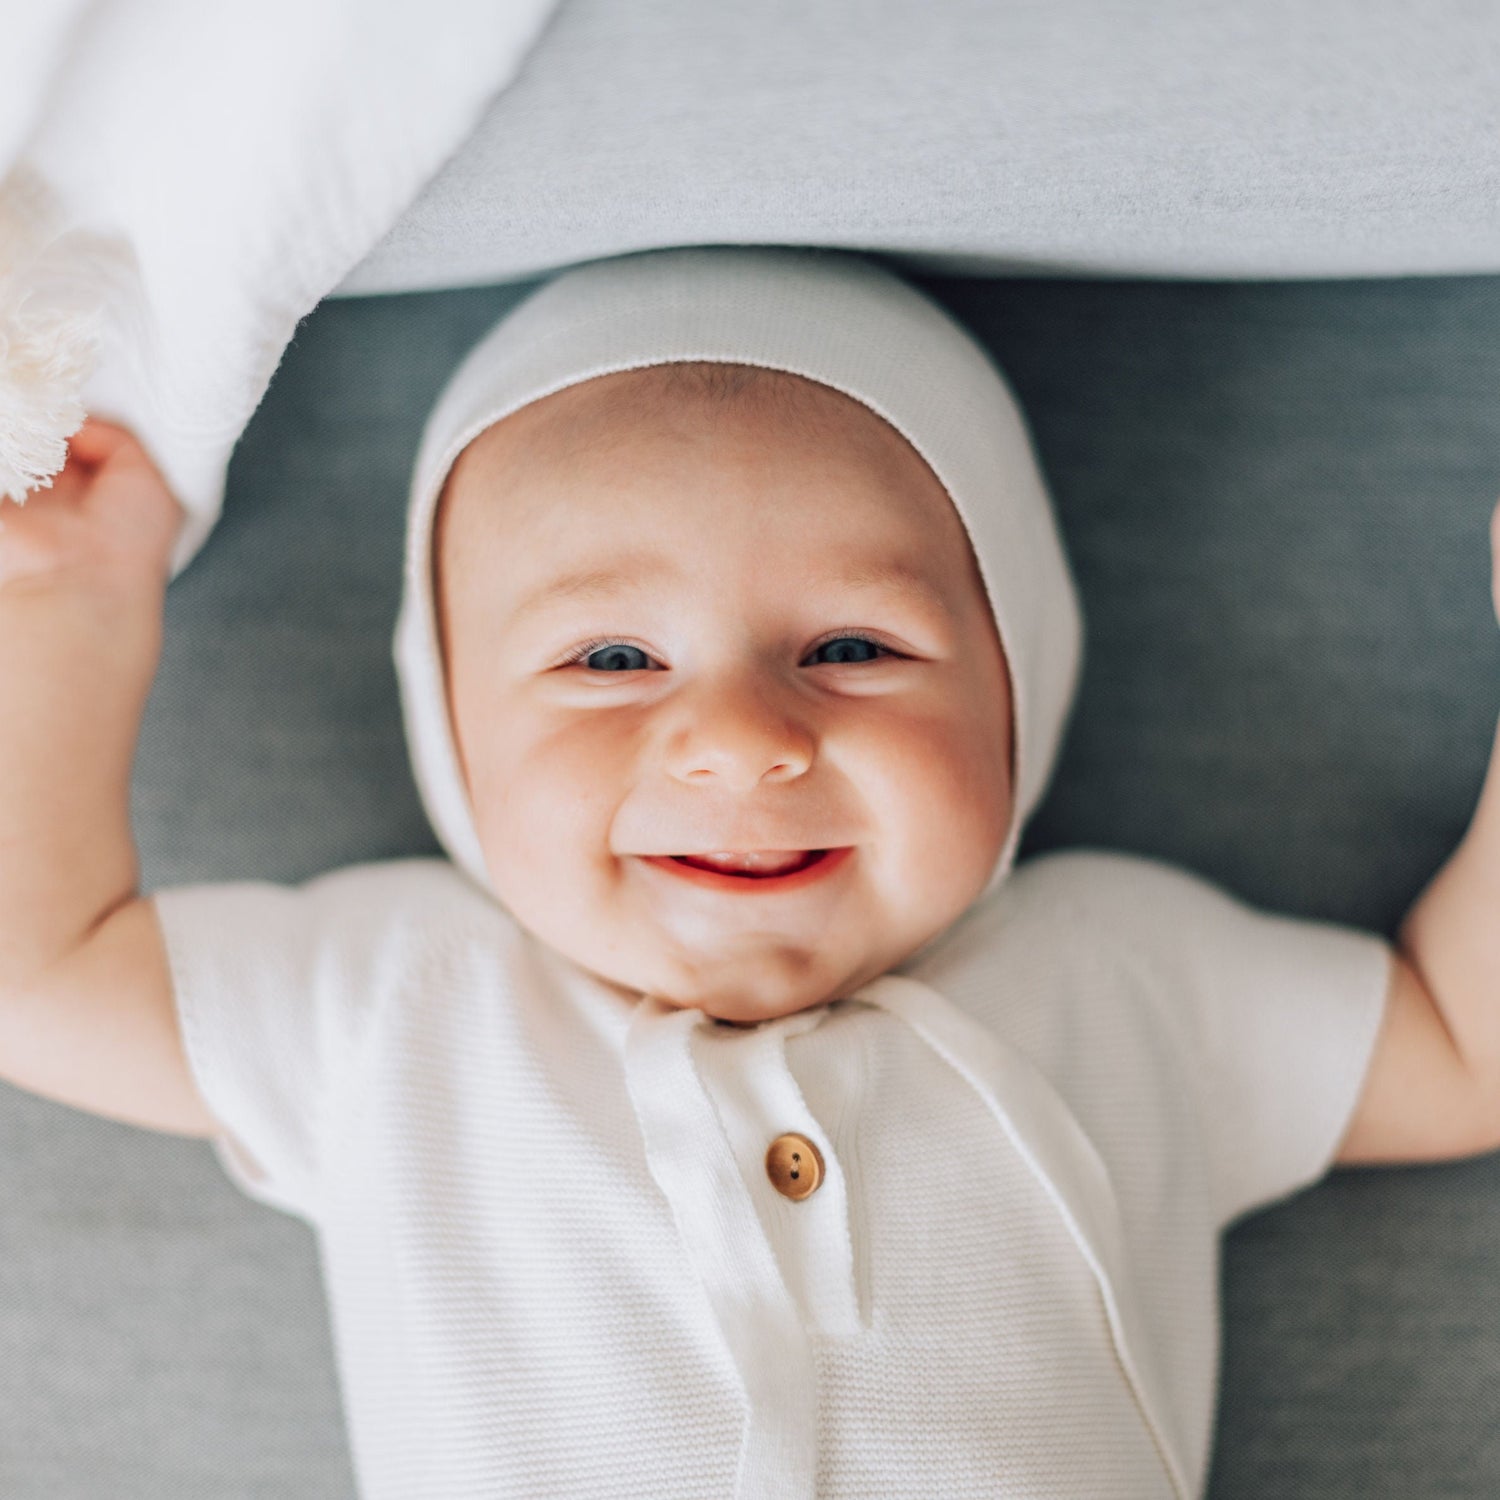 Smiling baby boy in white blessing outfit with white bonnet next to white blanket with tassels.